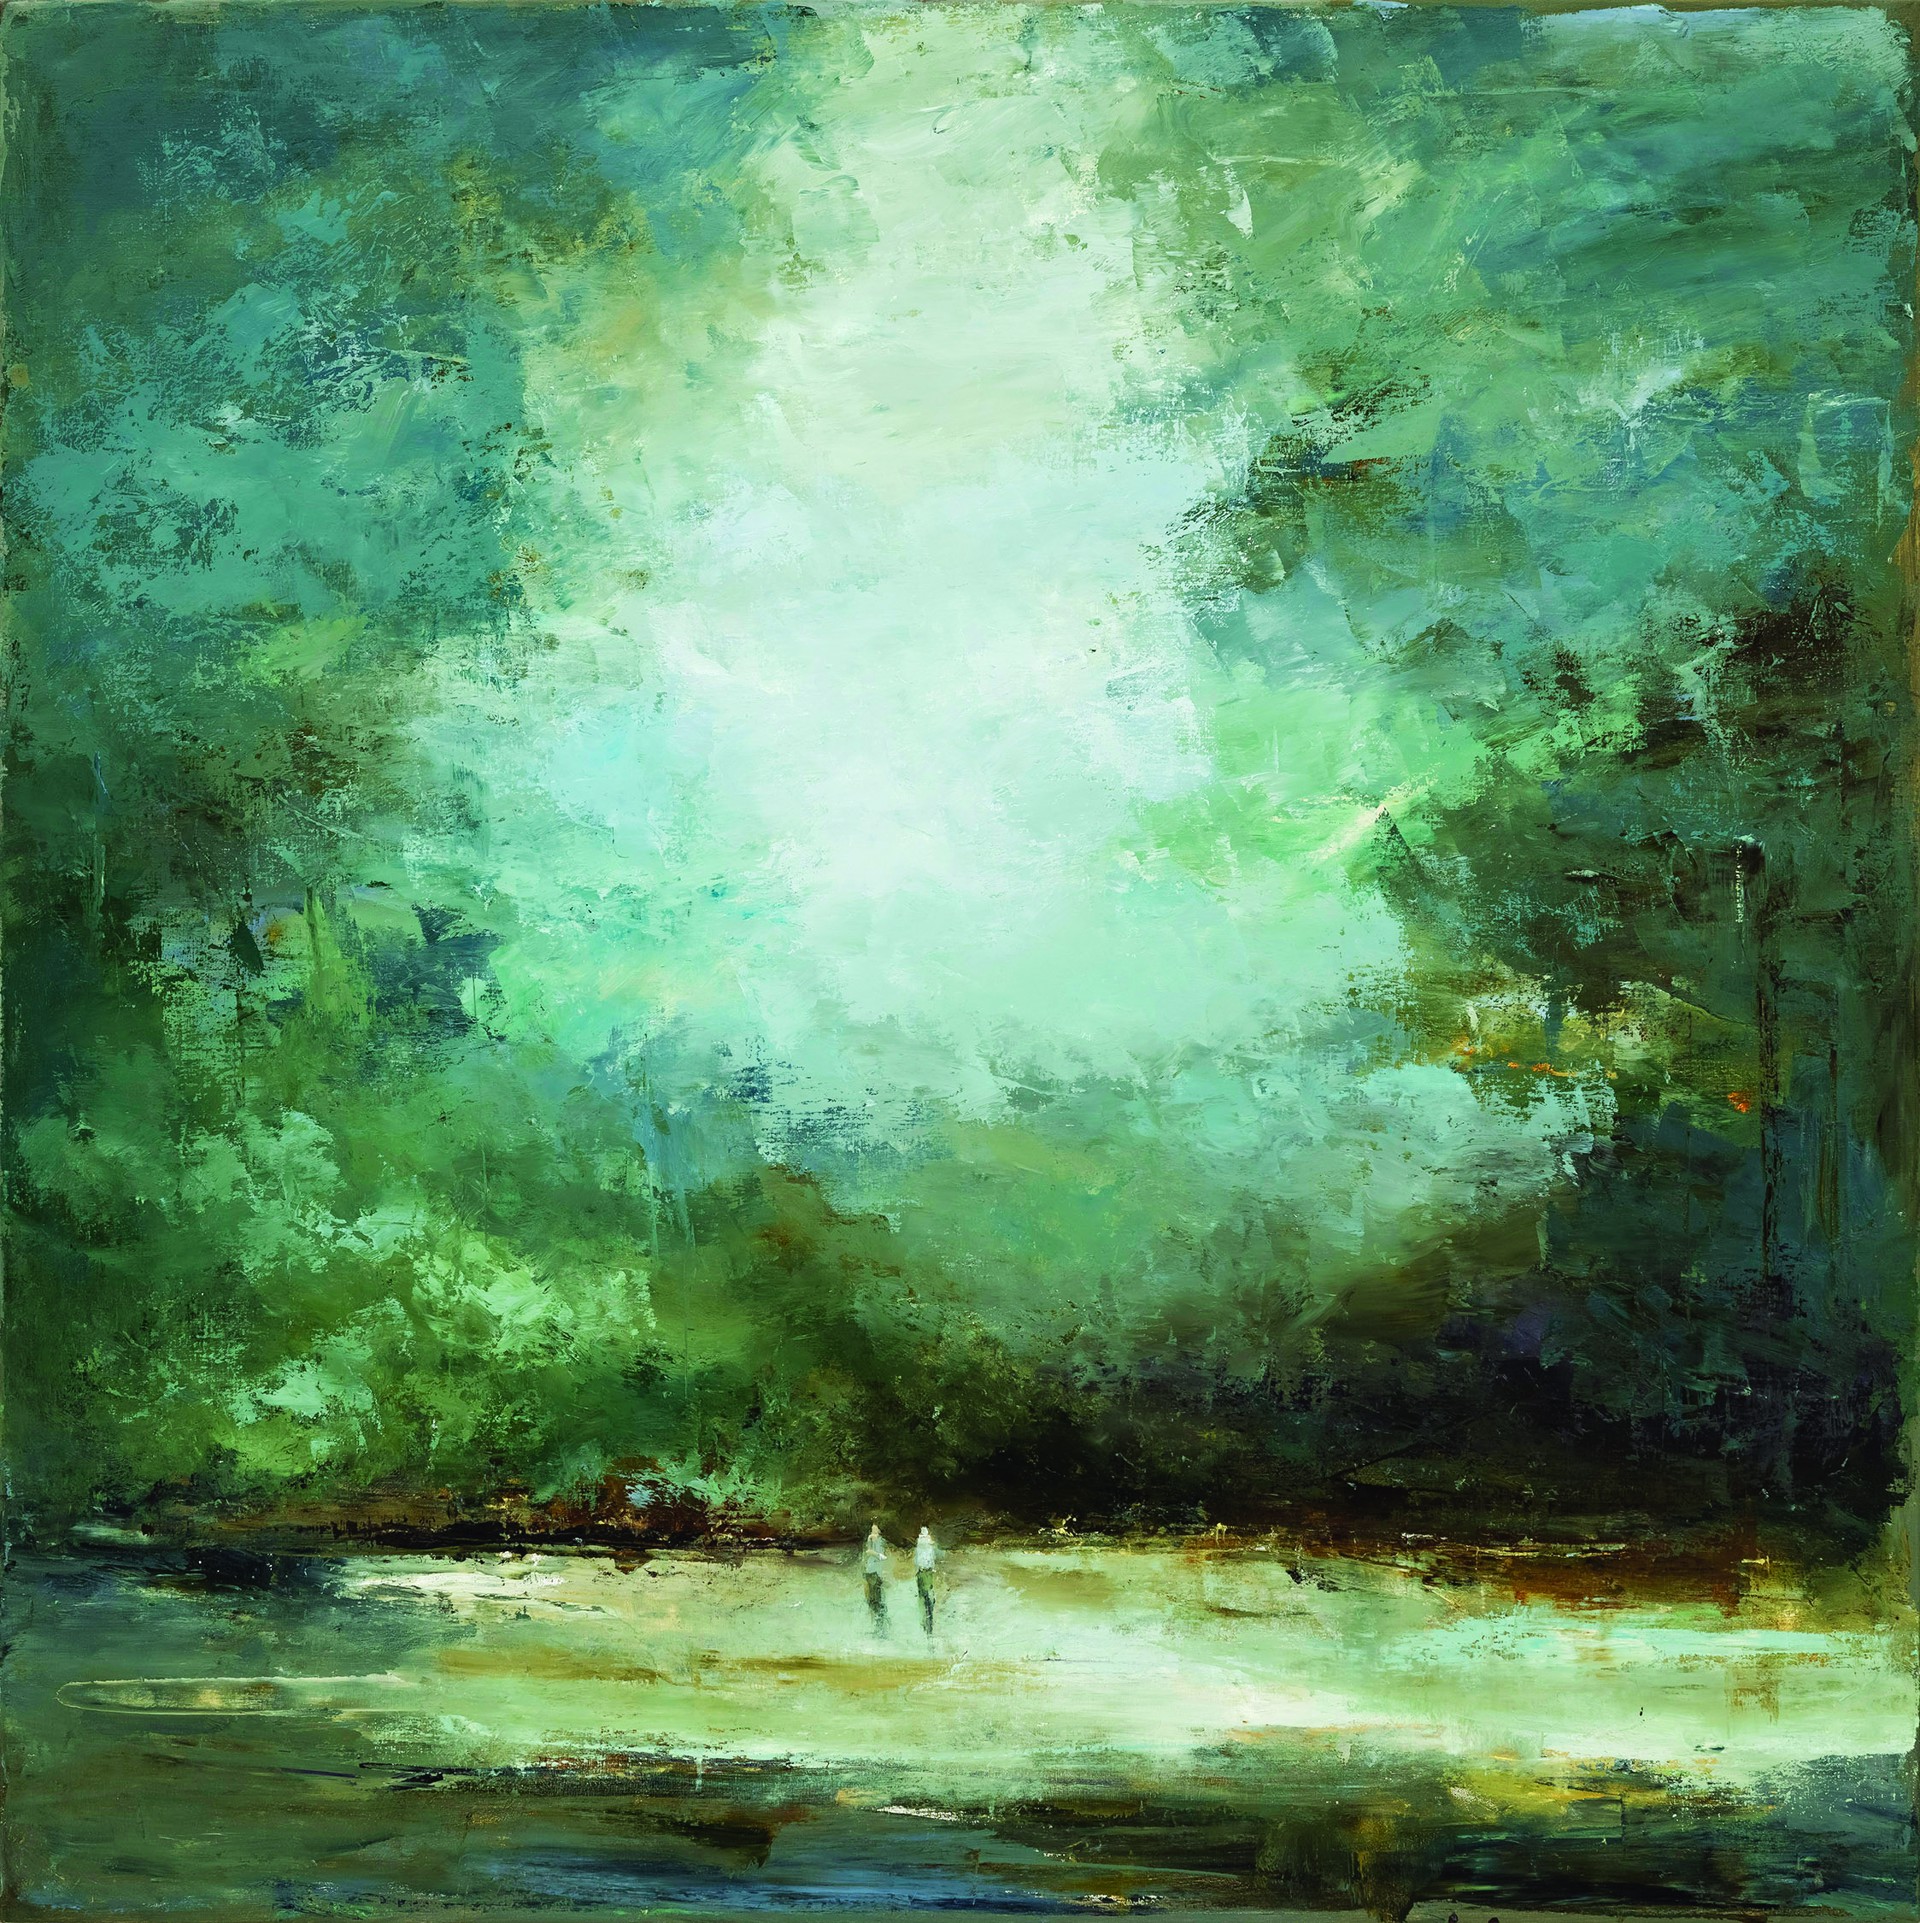 I Sleep Until Dusk is Dipped in Green by France Jodoin